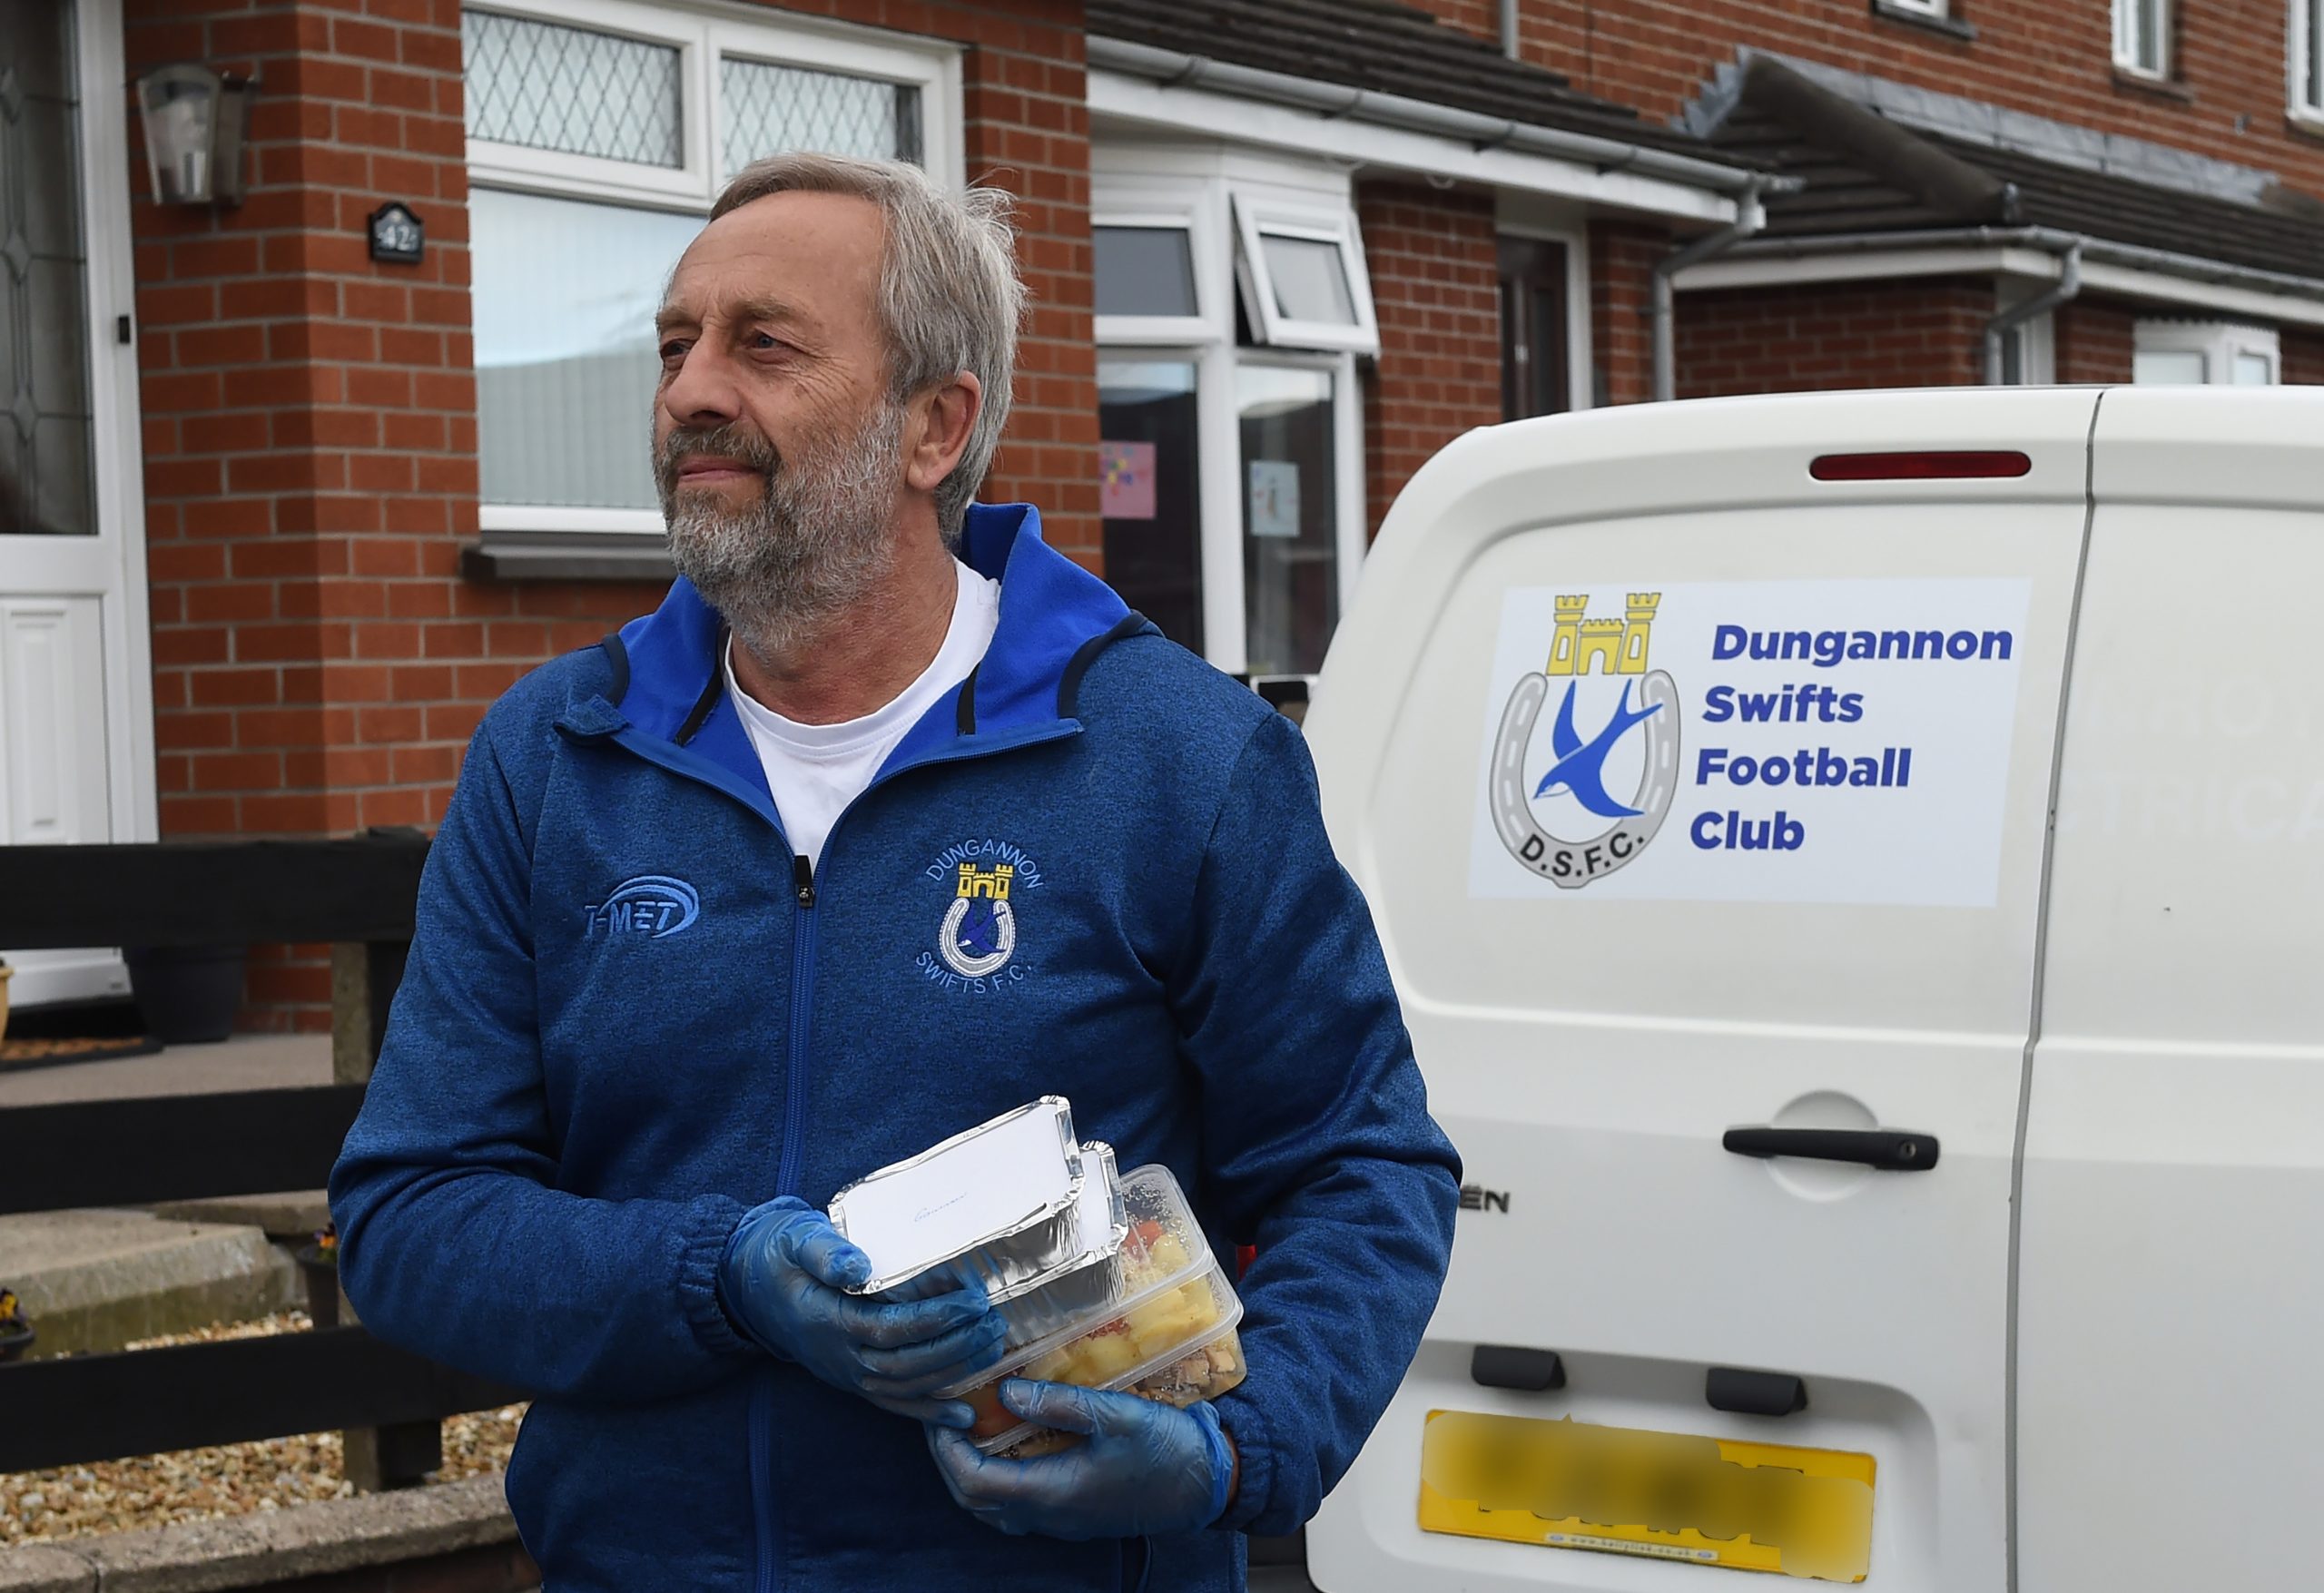  Dungannon Swifts charity delivers 1,000 meals